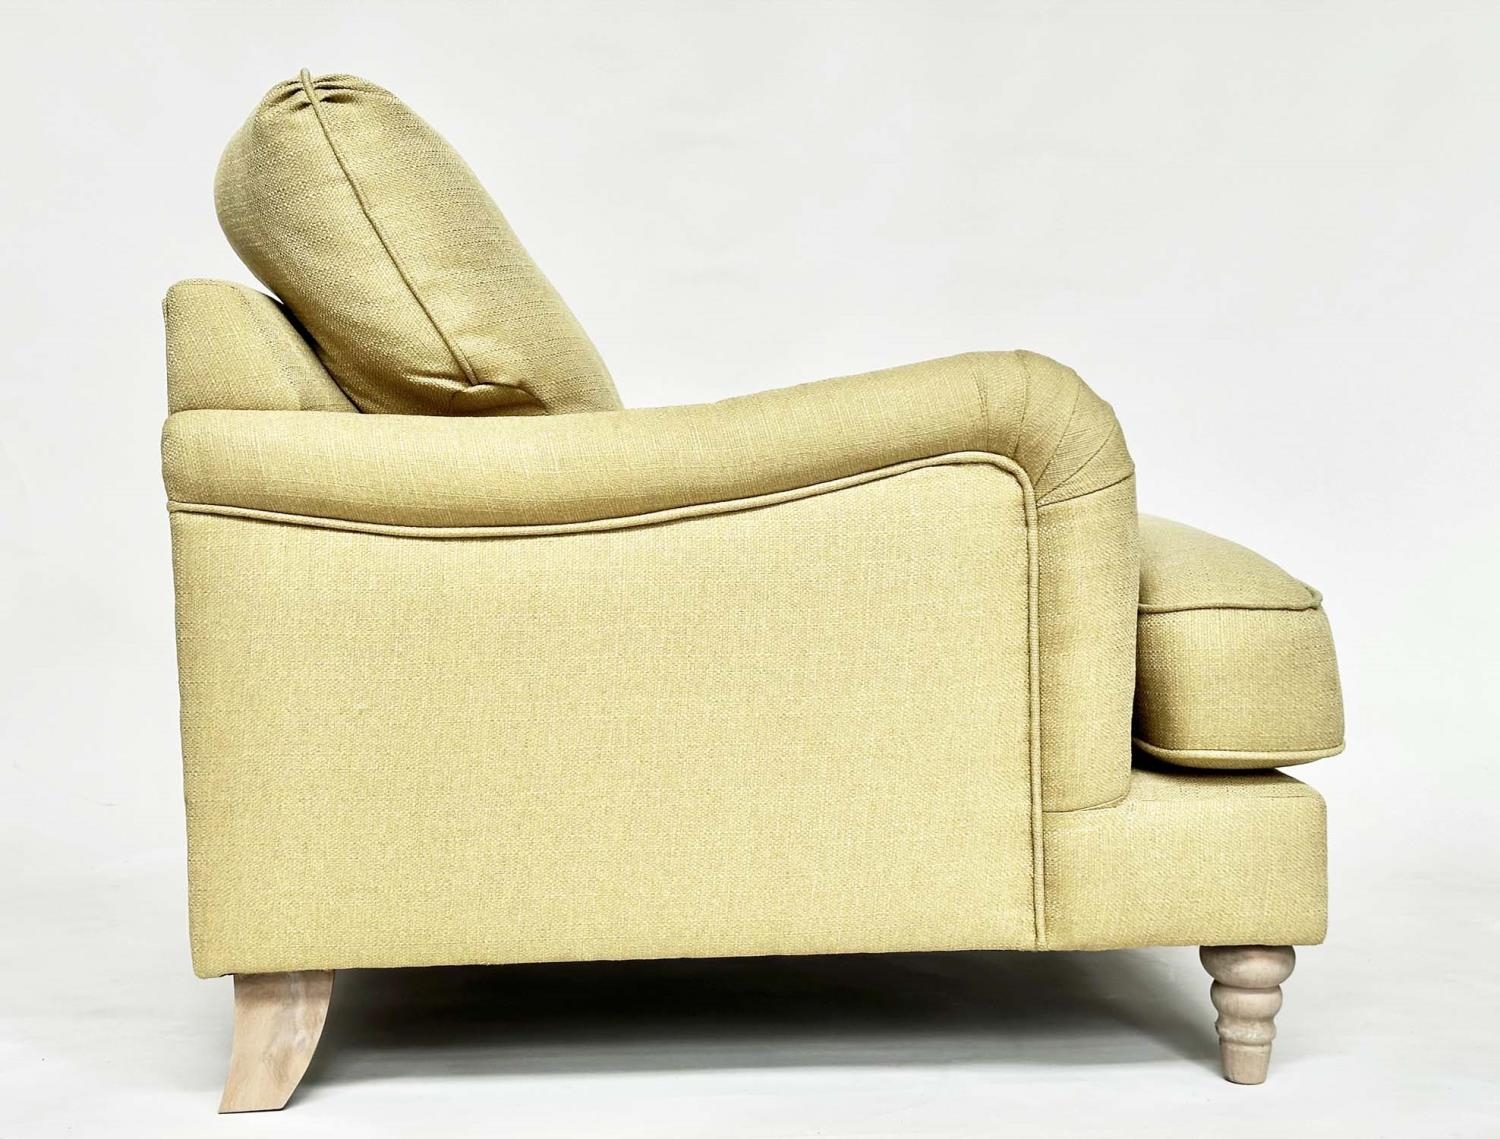 COUNTRY HOUSE ARMCHAIR, Howard and Son style Bridgewater model inspired with primrose yellow slub - Image 3 of 8